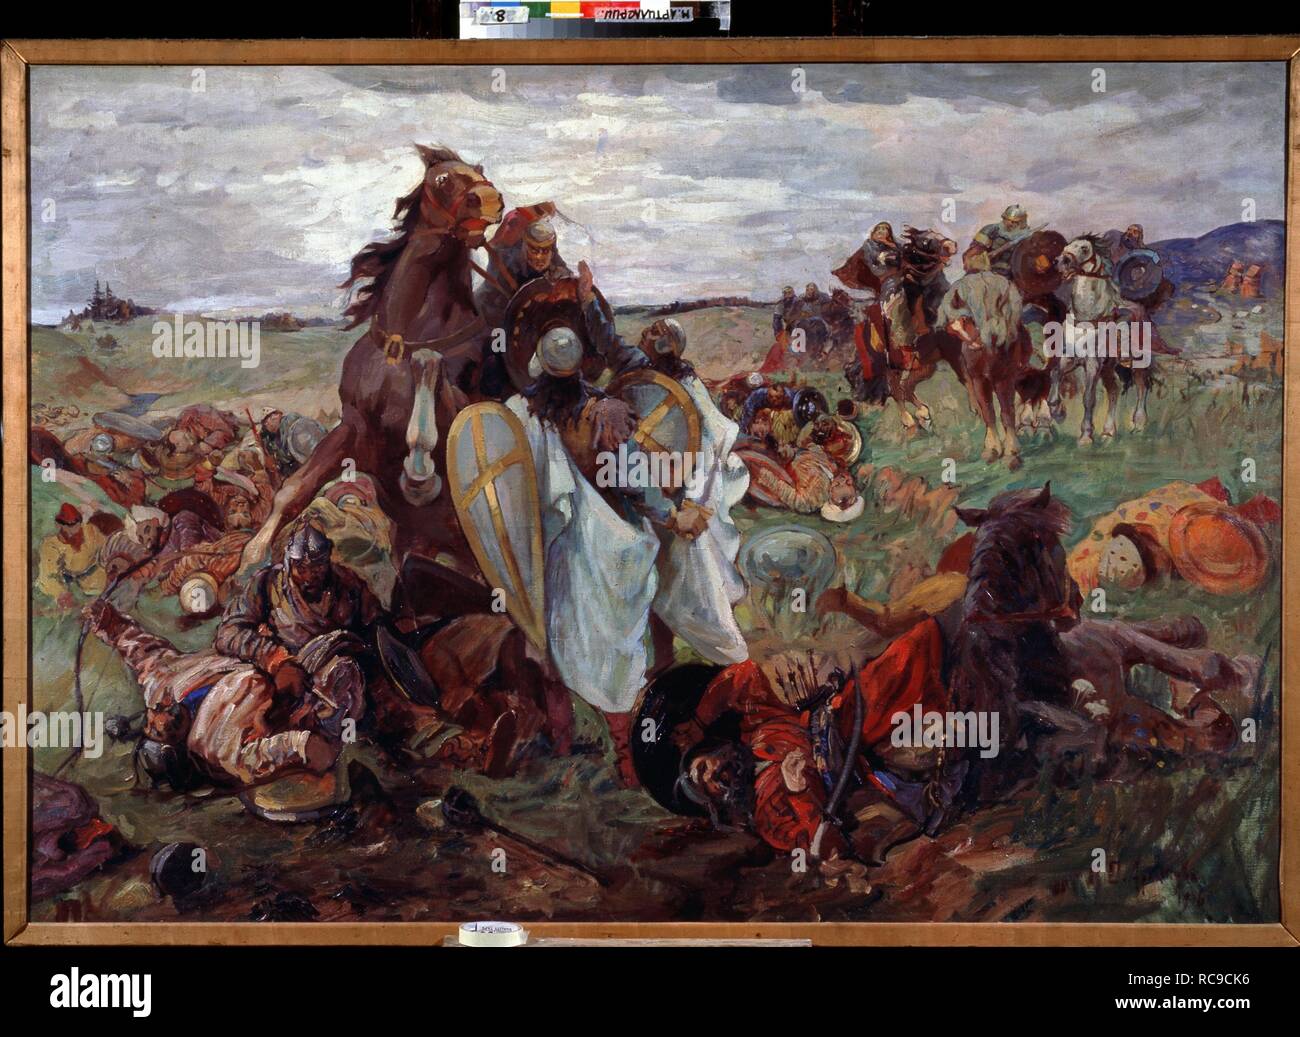 The Battle between Russians and Tatars. 13th century. Museum: State Central Artillery Museum, St. Petersburg. Author: Arkhipov, Sergei Nikolayevich. Stock Photo